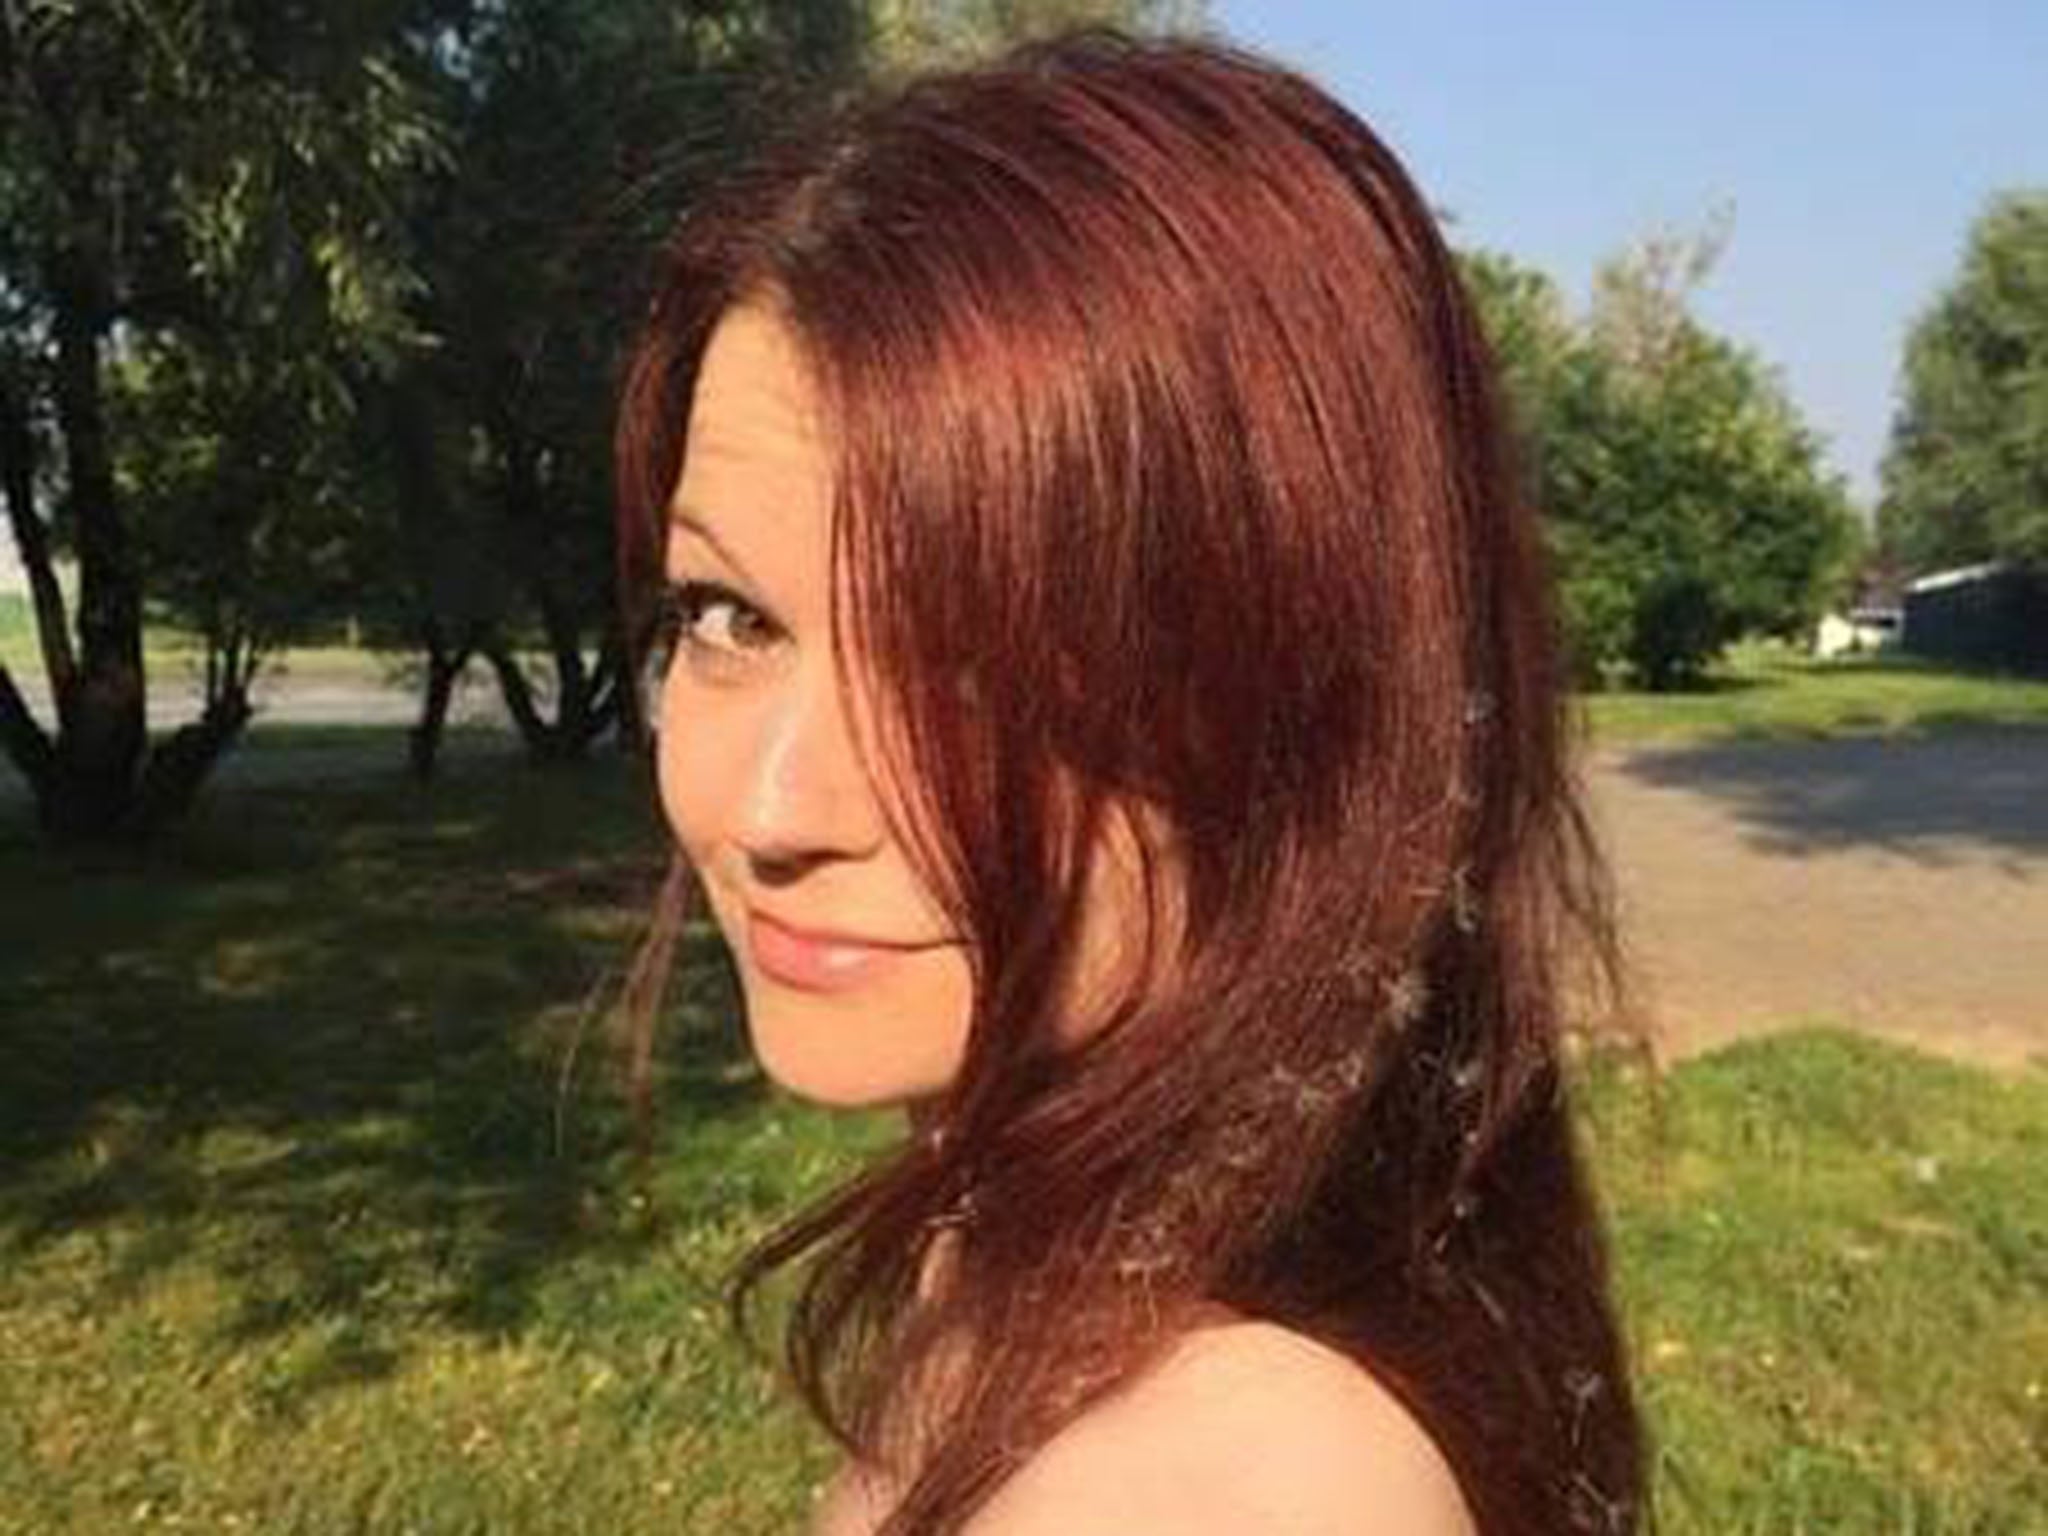 Yulia Skripal has ‘responded well to treatment’